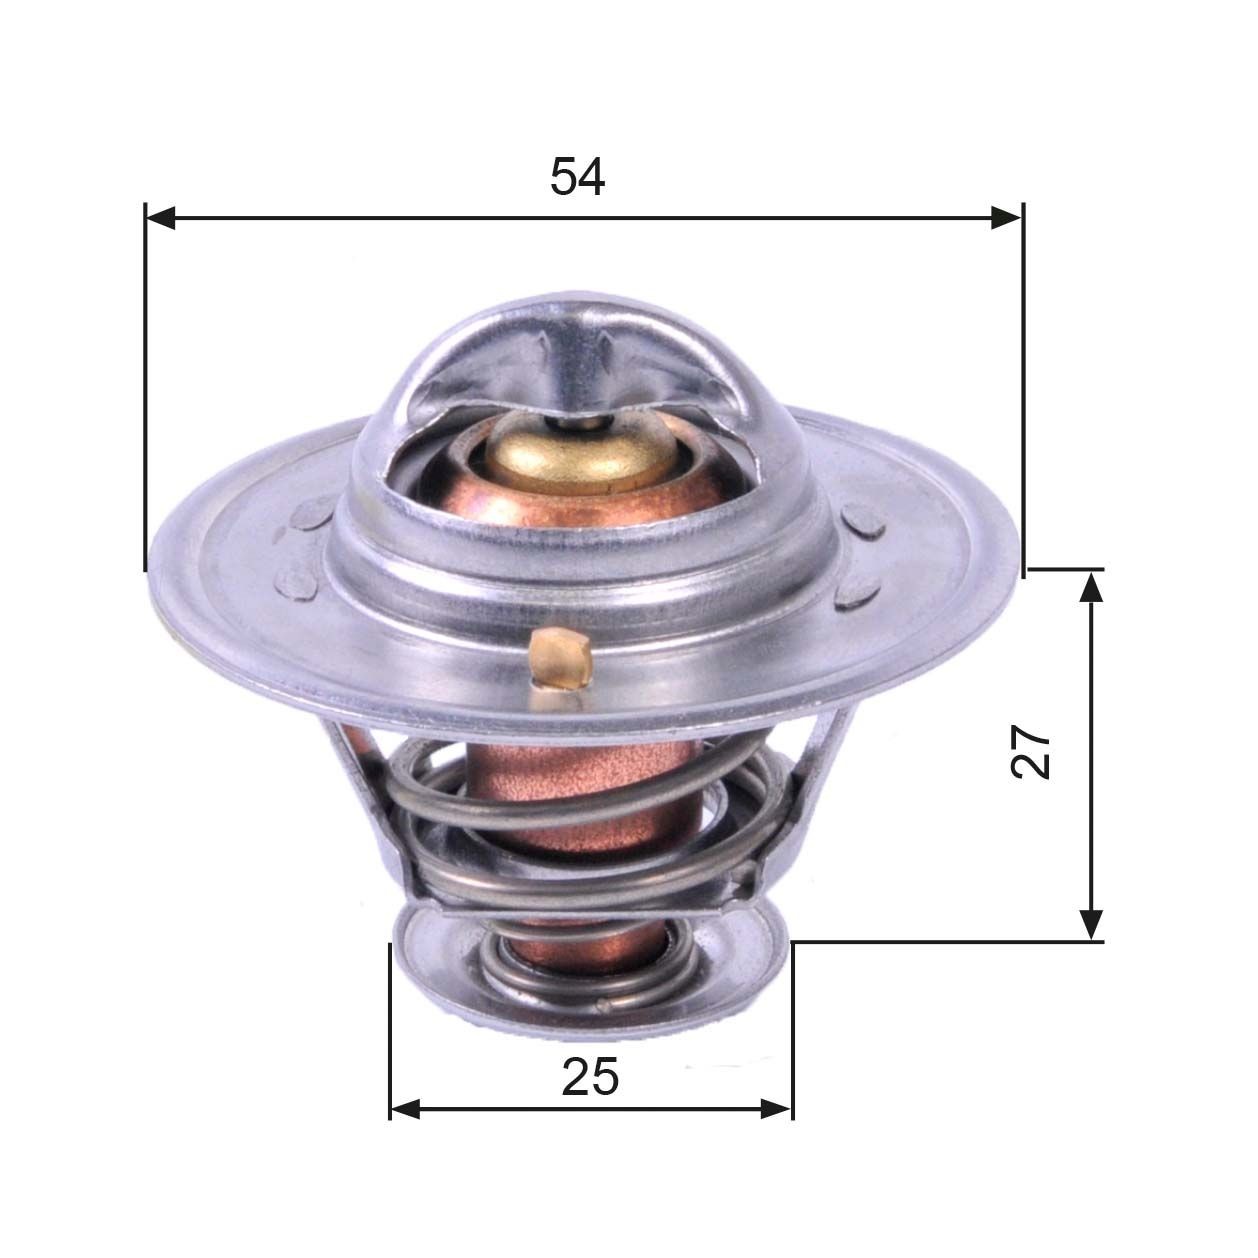 GATES TH22782G1 Engine thermostat Opening Temperature: 82°C, with gaskets/seals, without housing